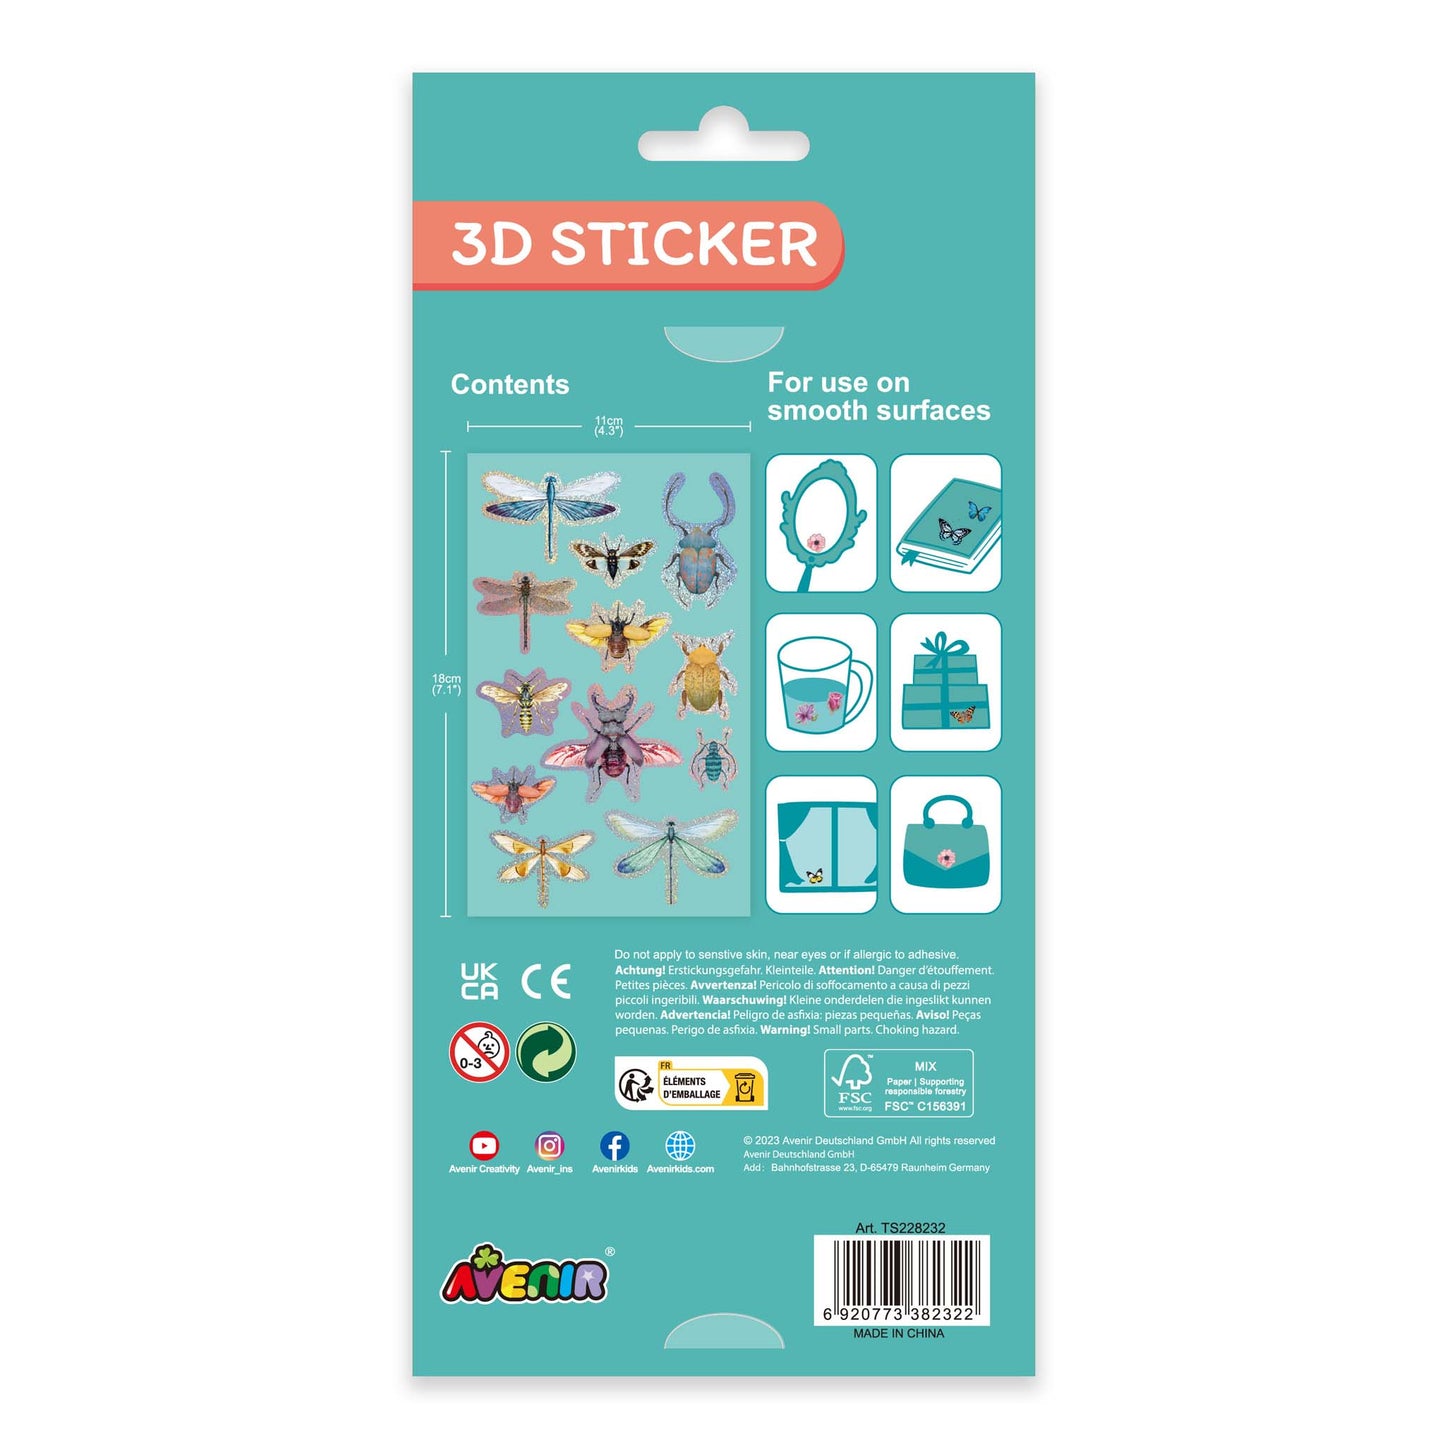 3D Sticker Insects